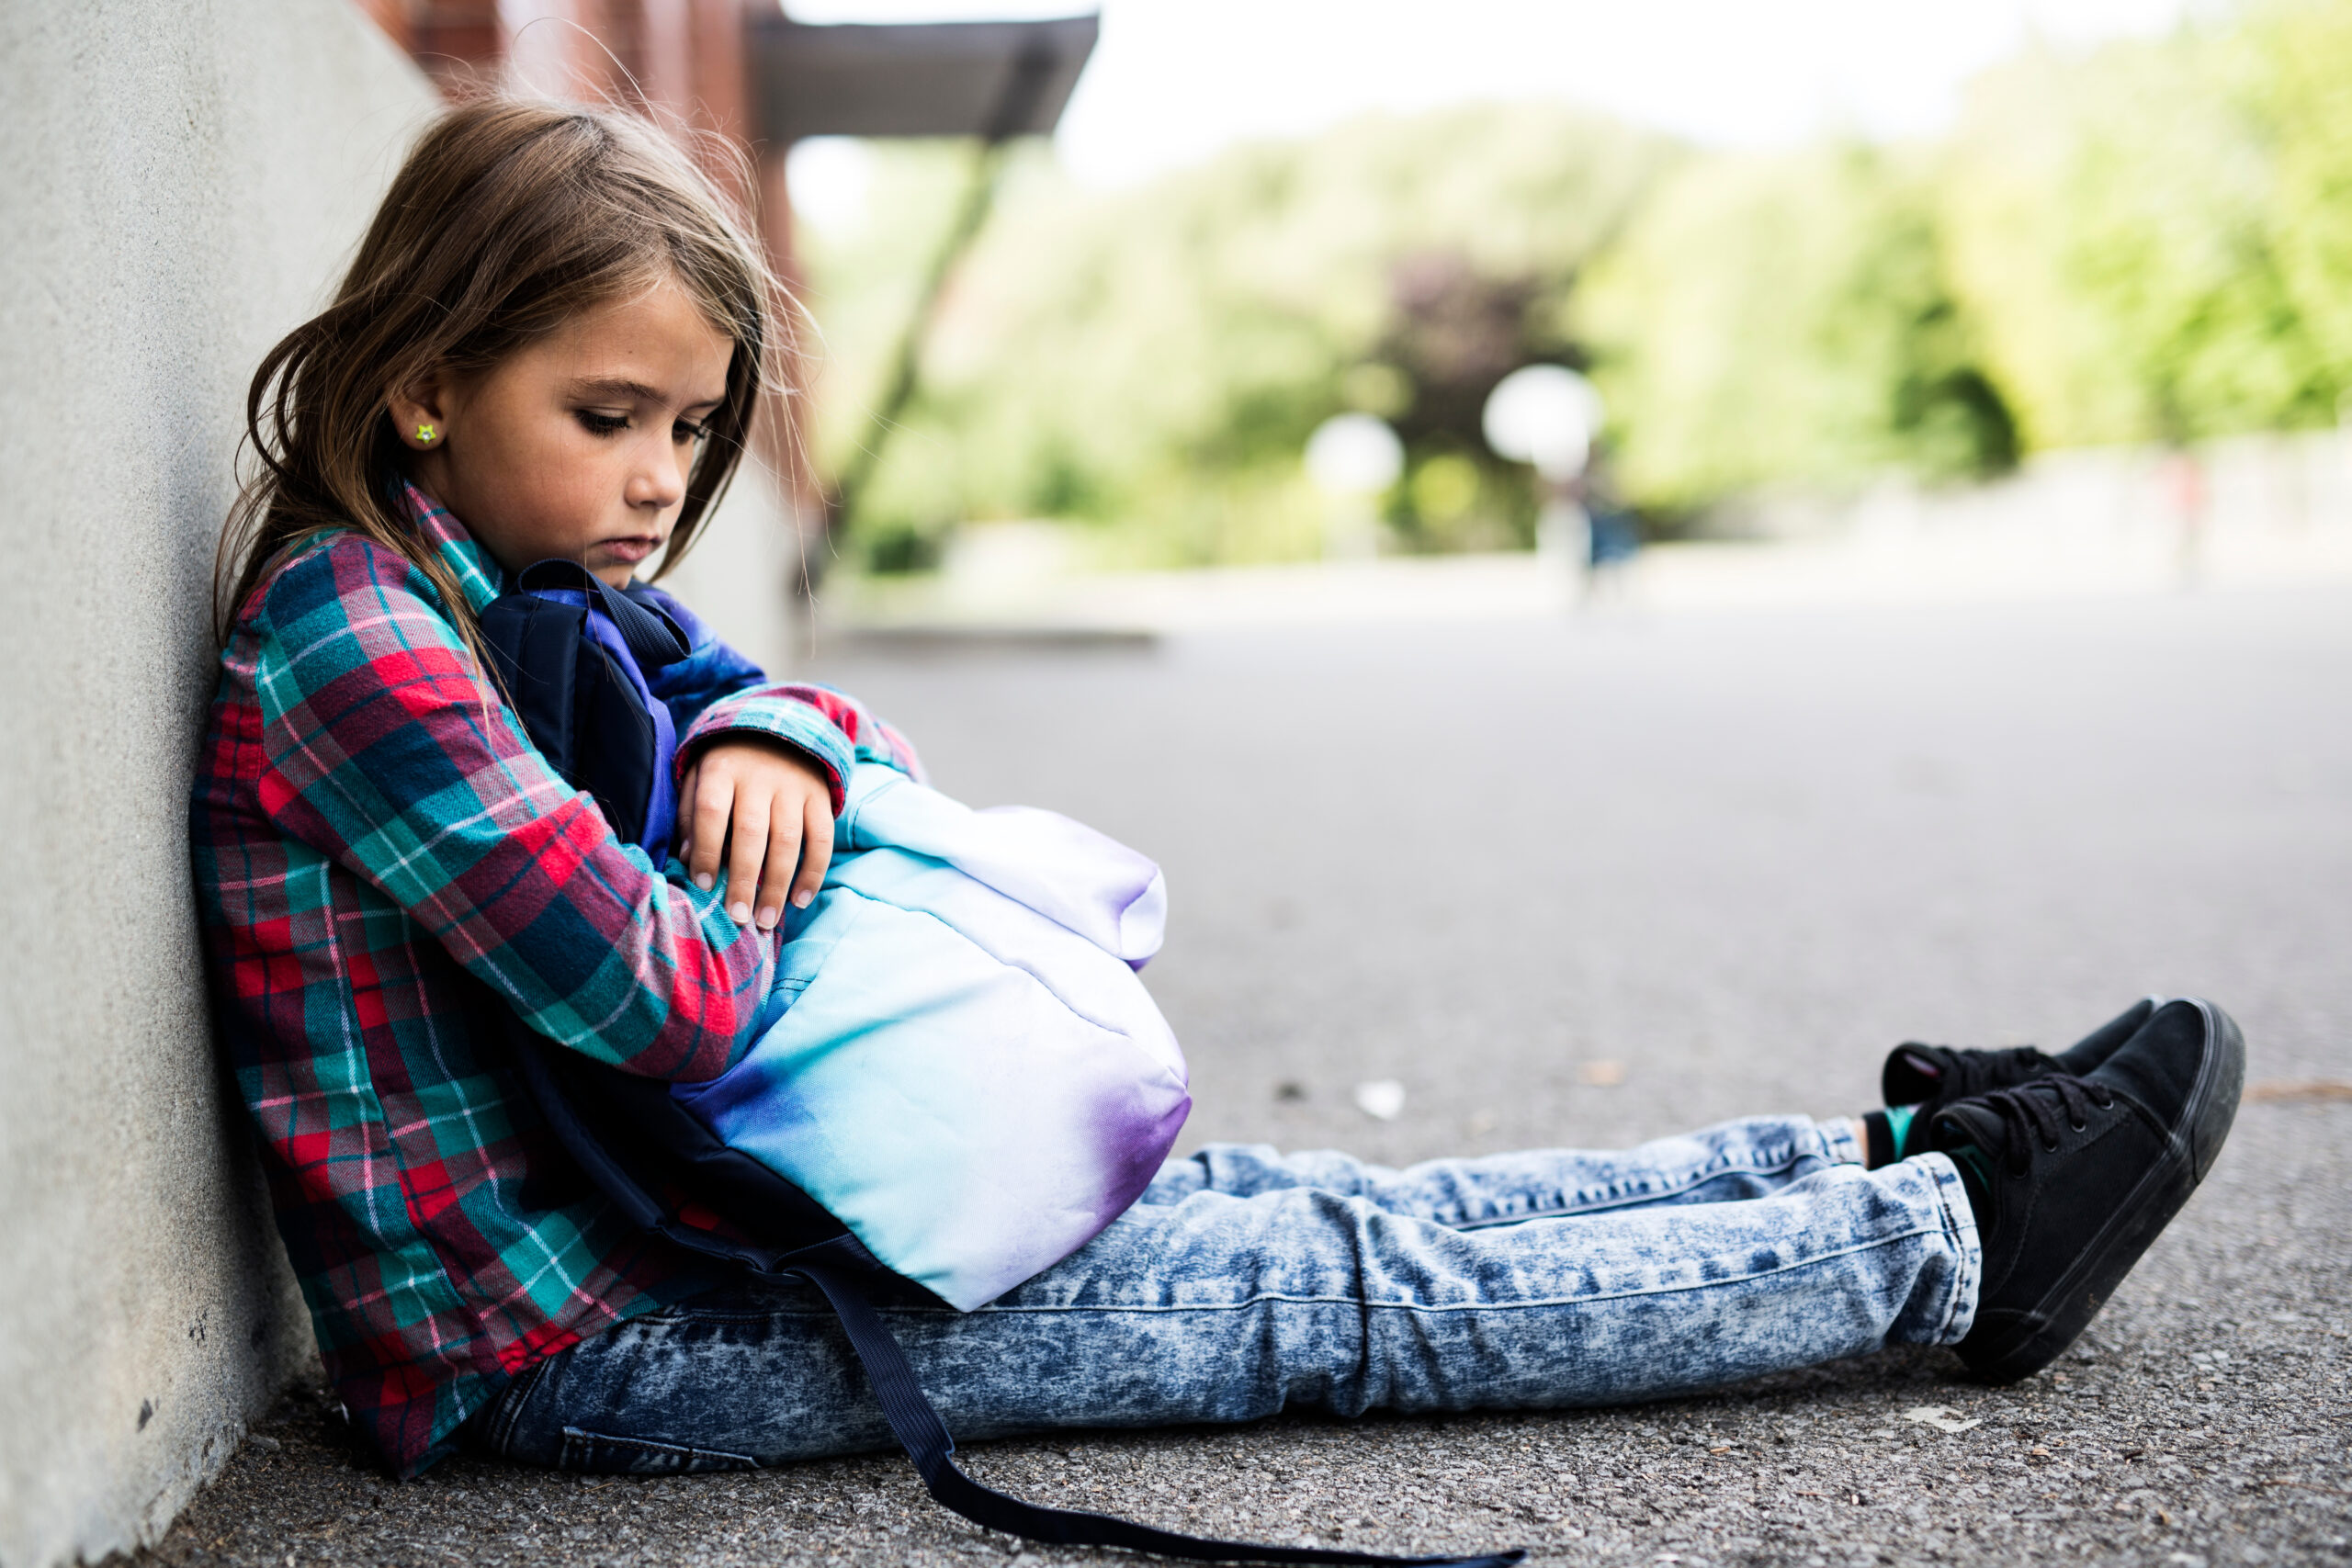 sad girl sitting on the ground with backpack